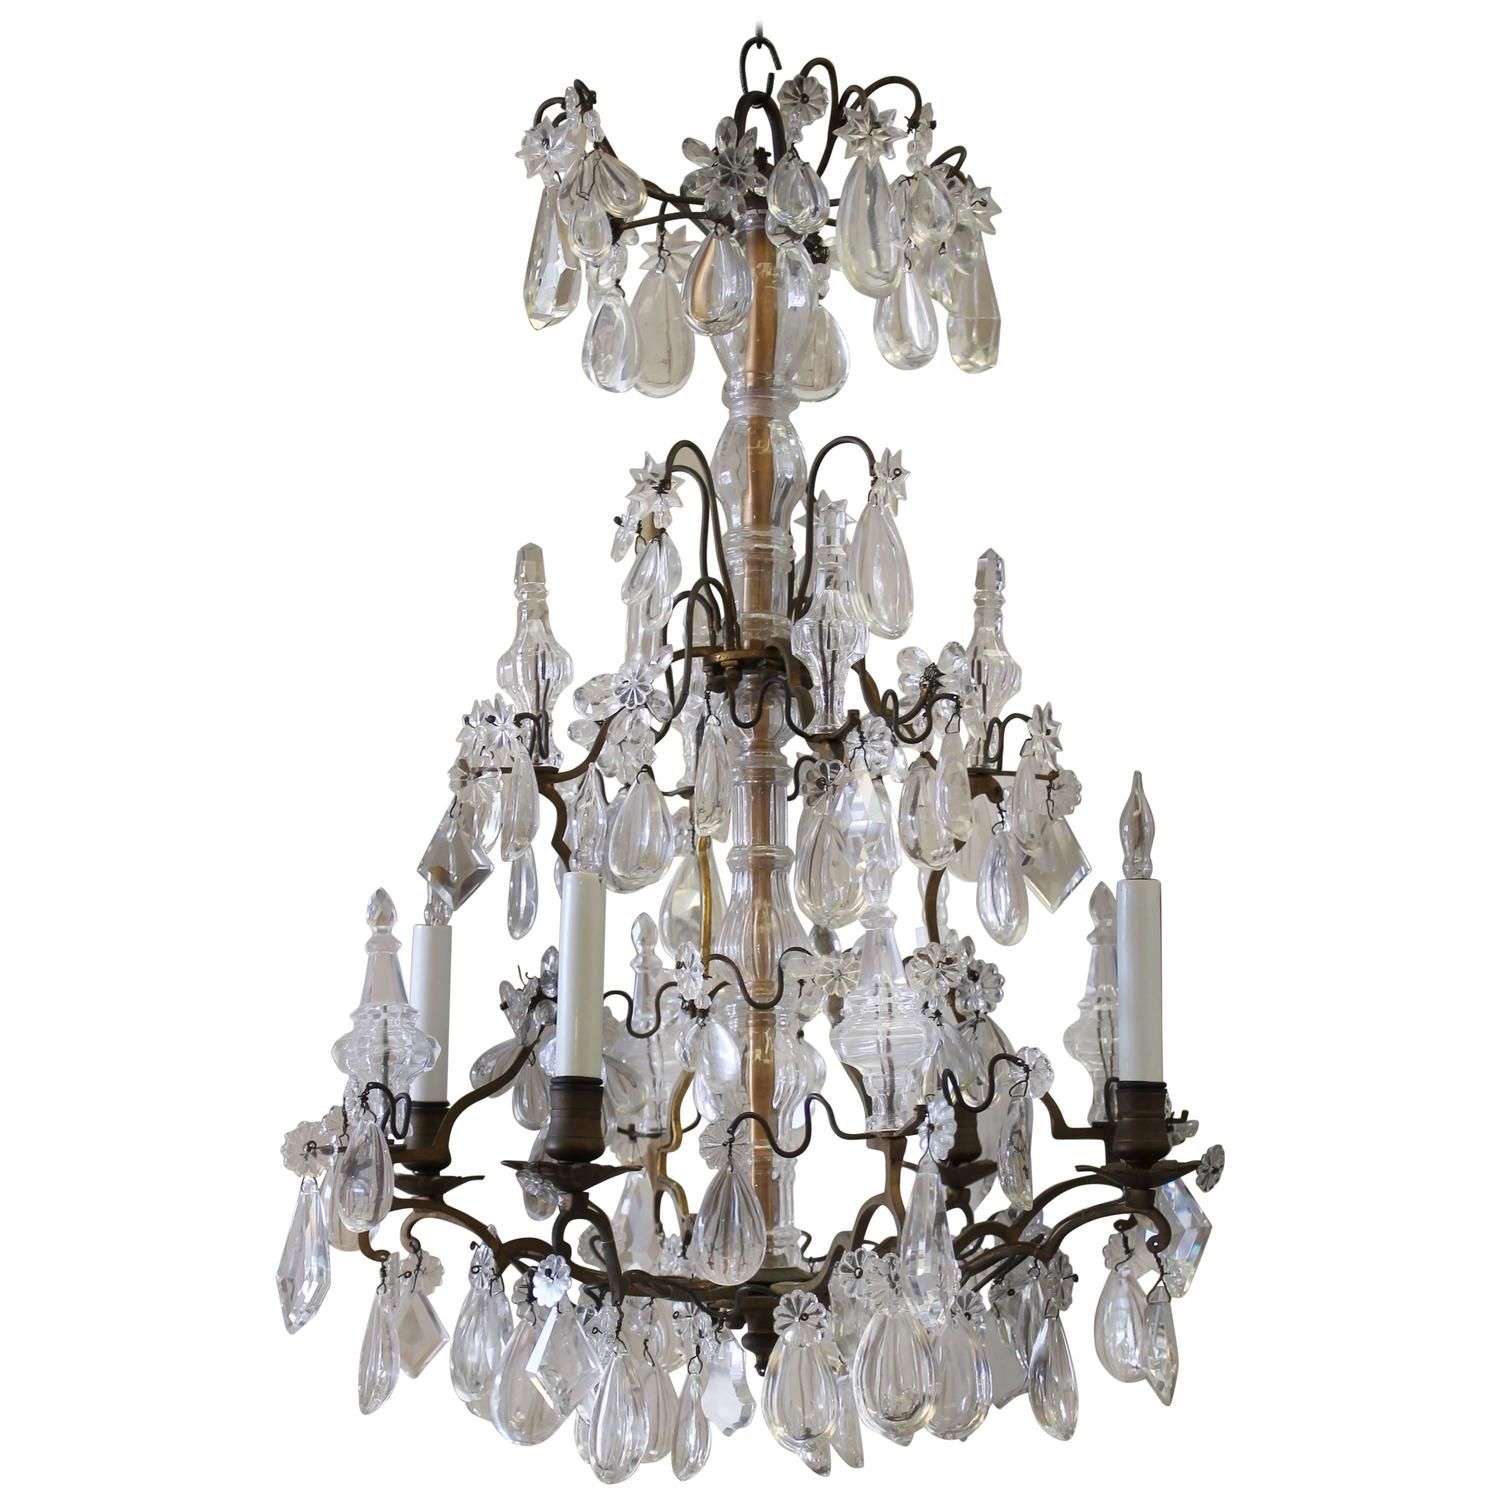 Antique French Bronze And Crystal Chandelier For Sale At Inside Bronze And Crystal Chandeliers (View 10 of 15)